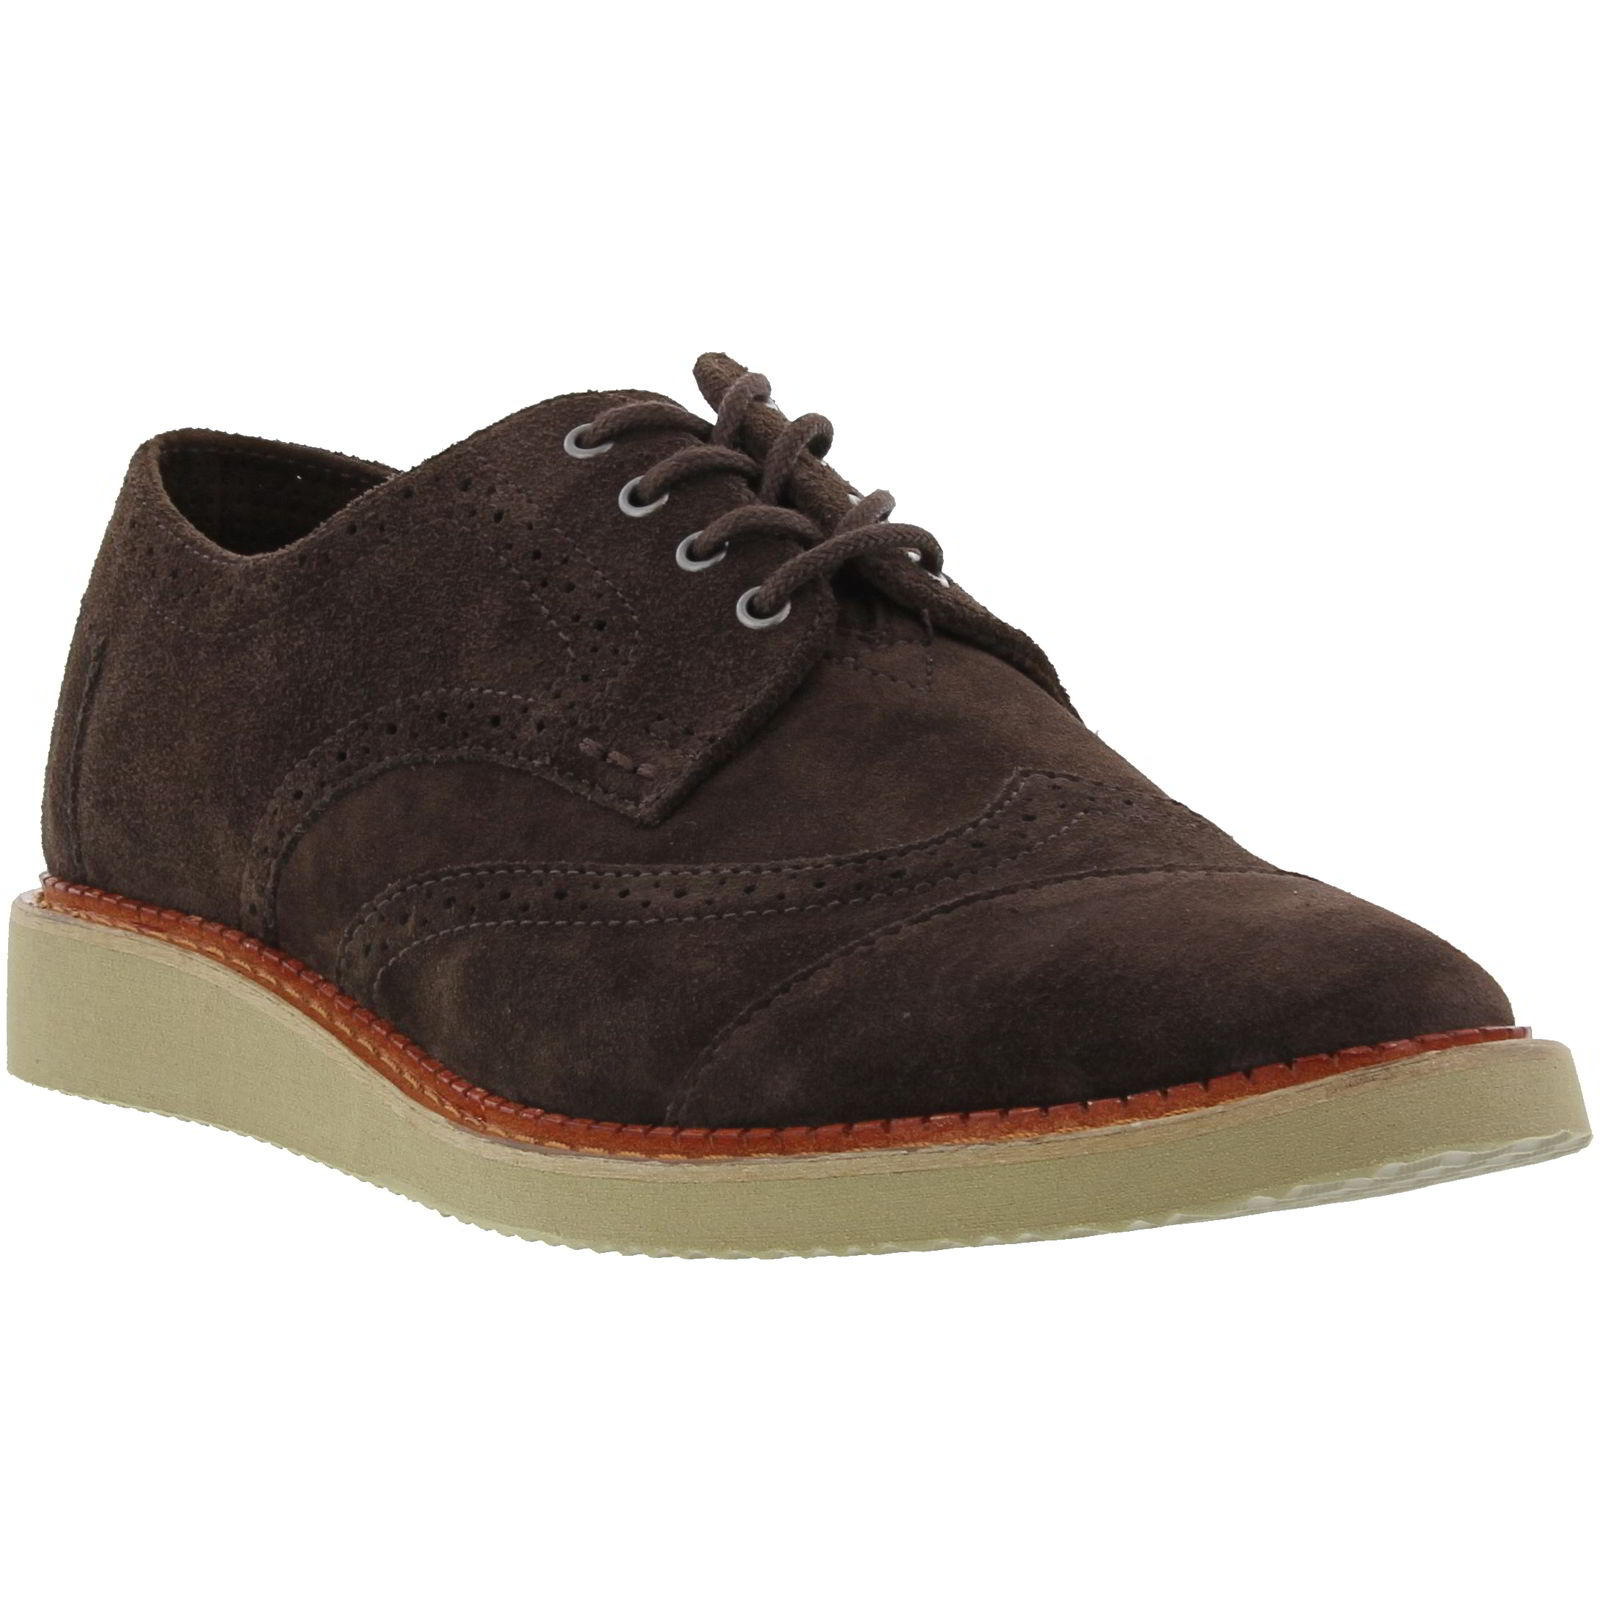 TOMS Toms Mens Brogues Shoes - Chocolate Brown Suede 2951